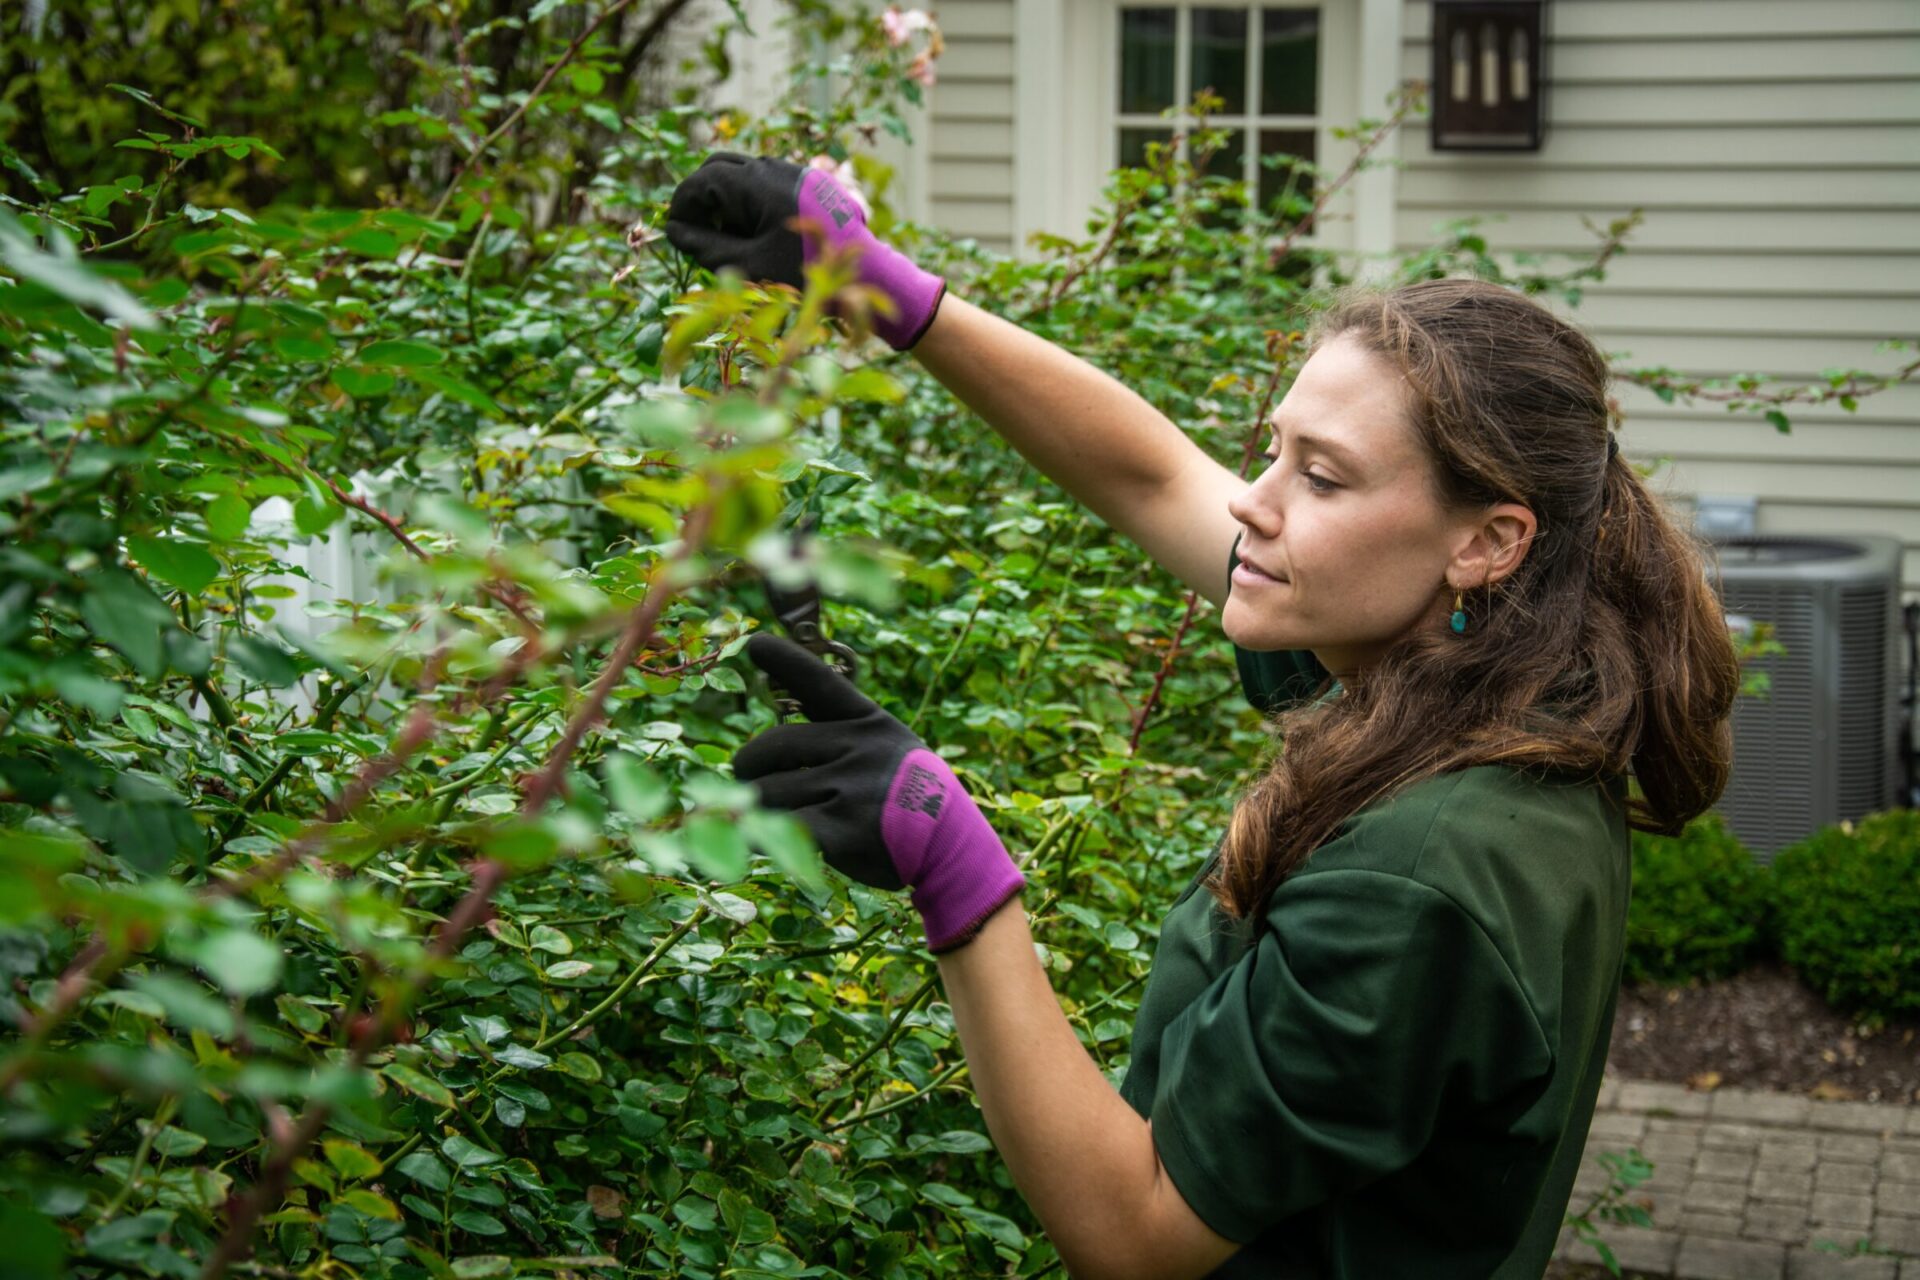 A person is tending to a bush wearing gloves, with a focused expression. A house with white siding and windows is in the background.